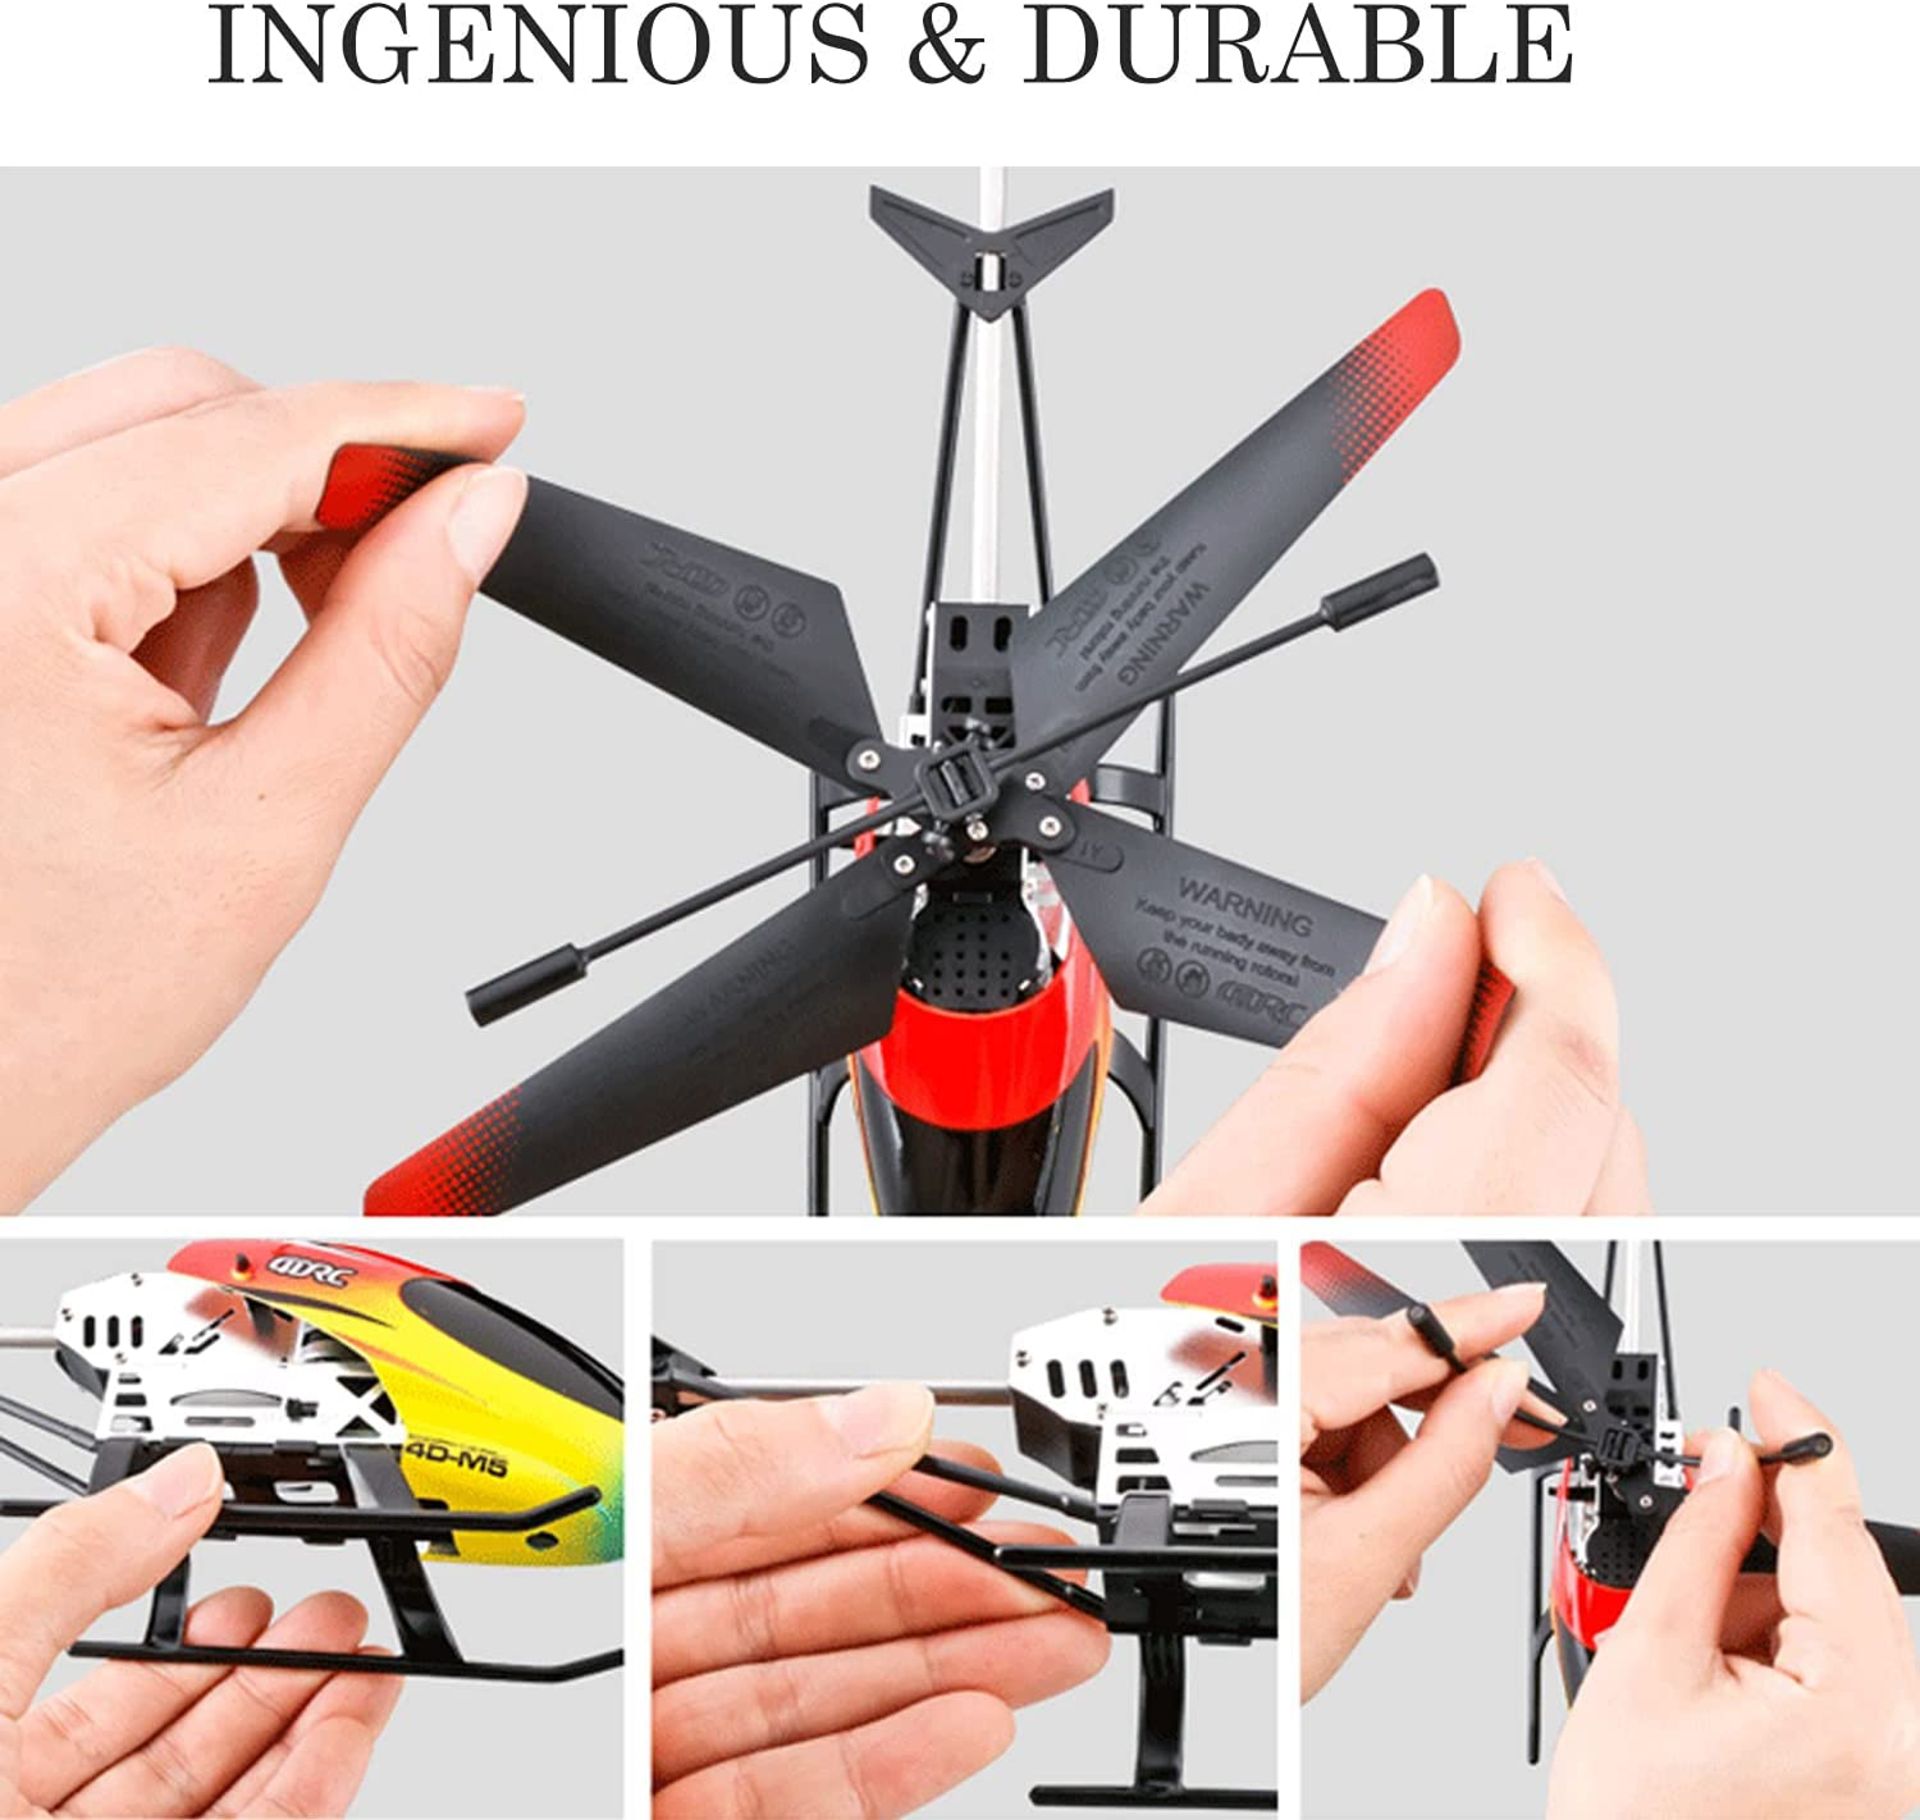 6 x 4DRC M5 Remote Control Helicopter Altitude Hold RC Helicopters with Gyro for Adult Kid - Image 2 of 2